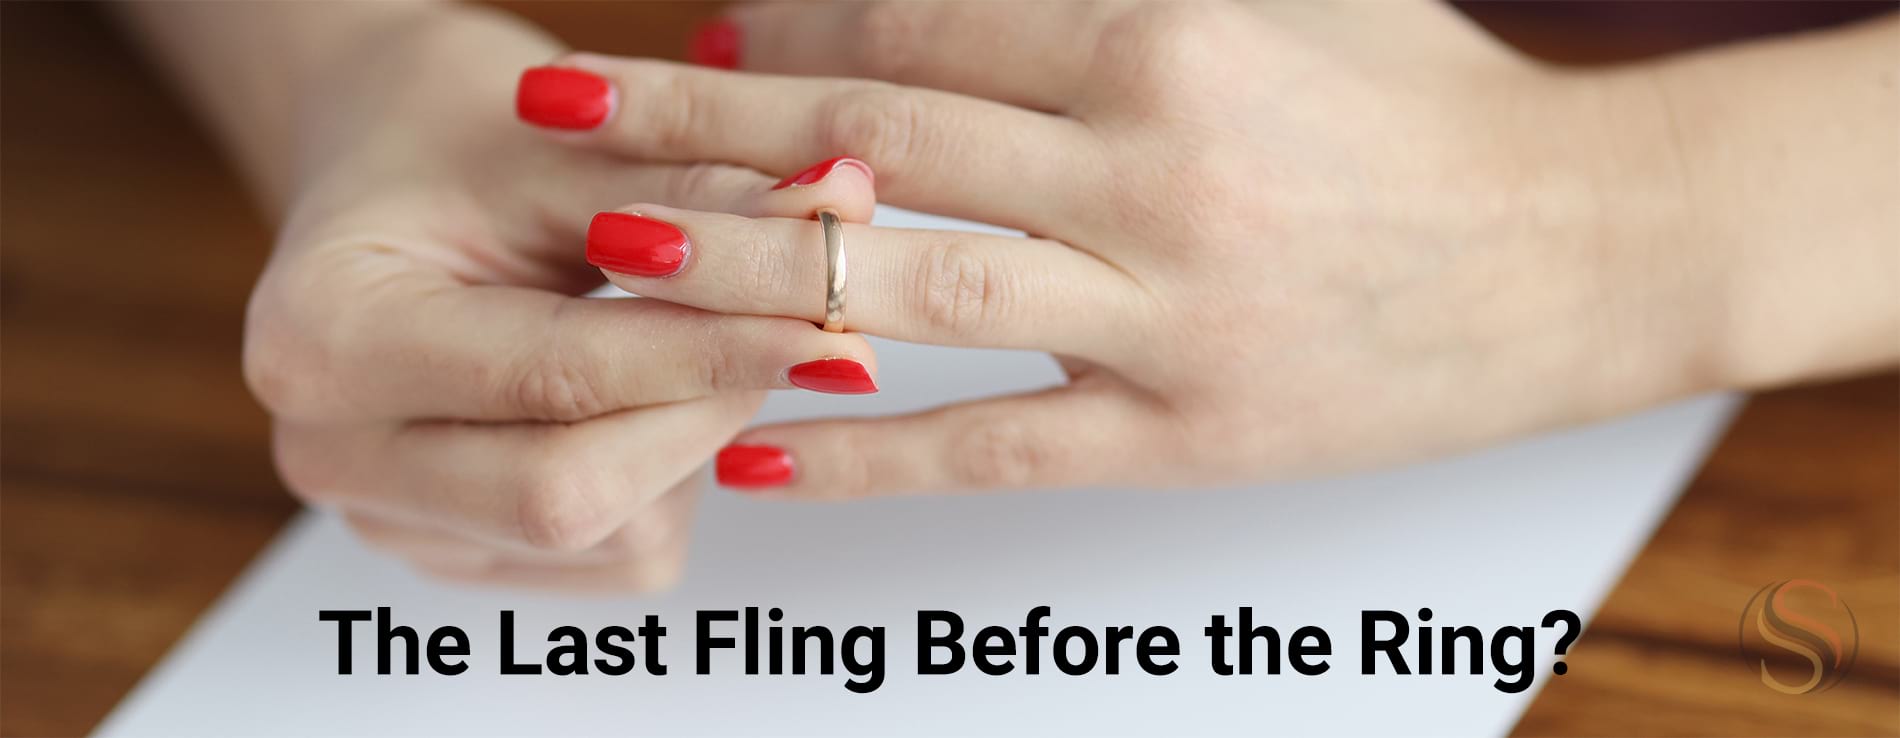 Woman putting on wedding band with the words The last fling before the ring?